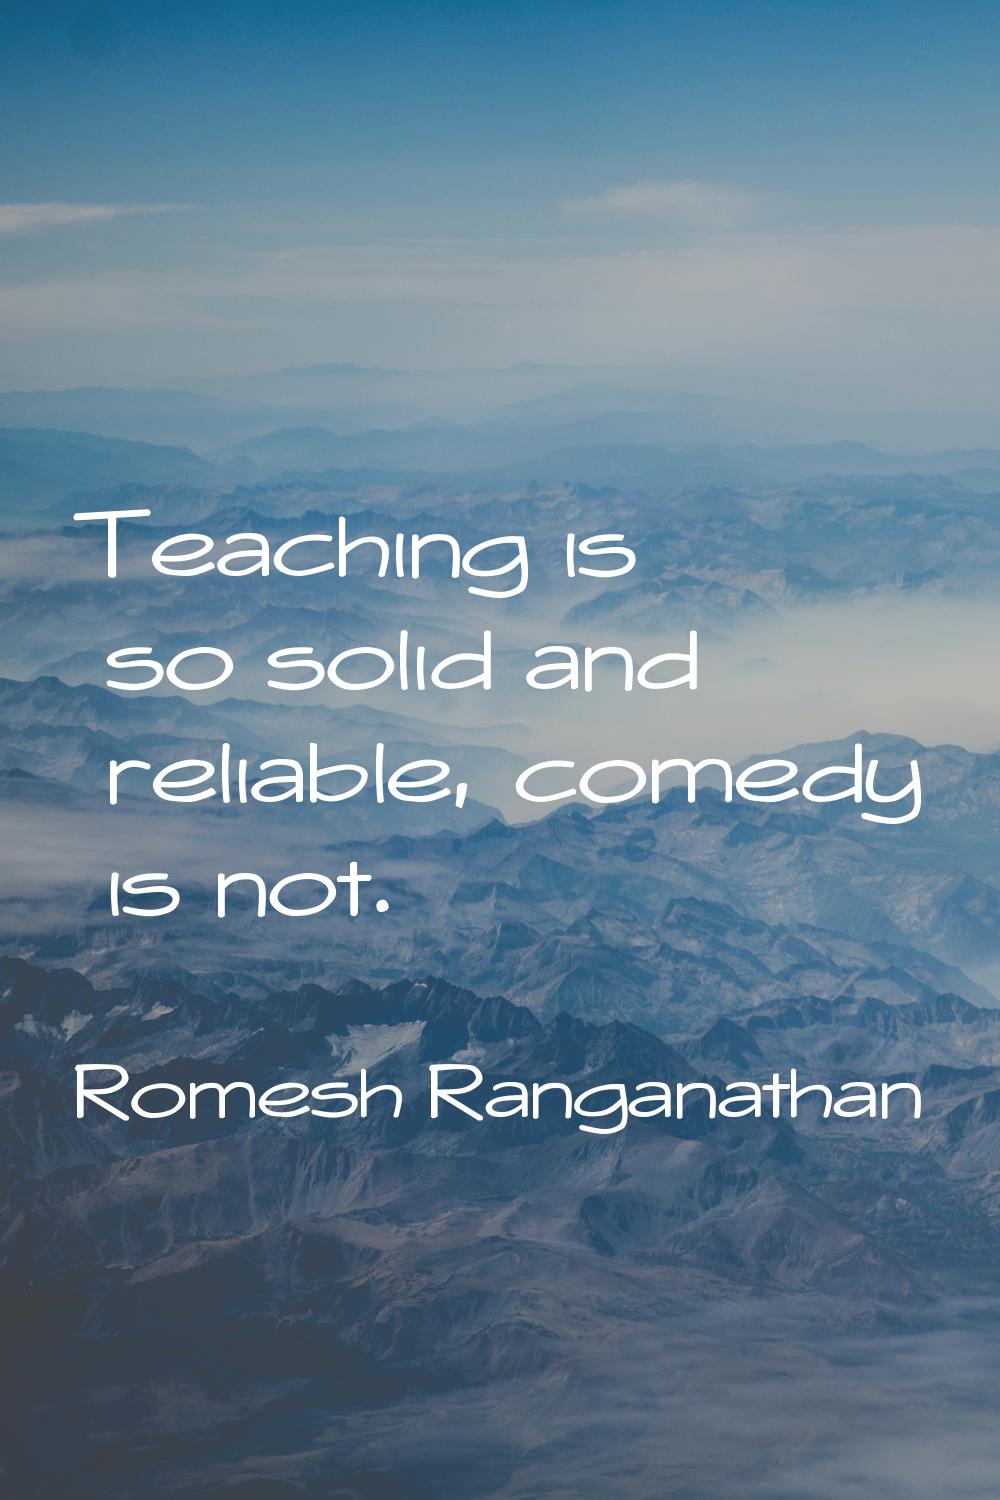 Teaching is so solid and reliable, comedy is not.